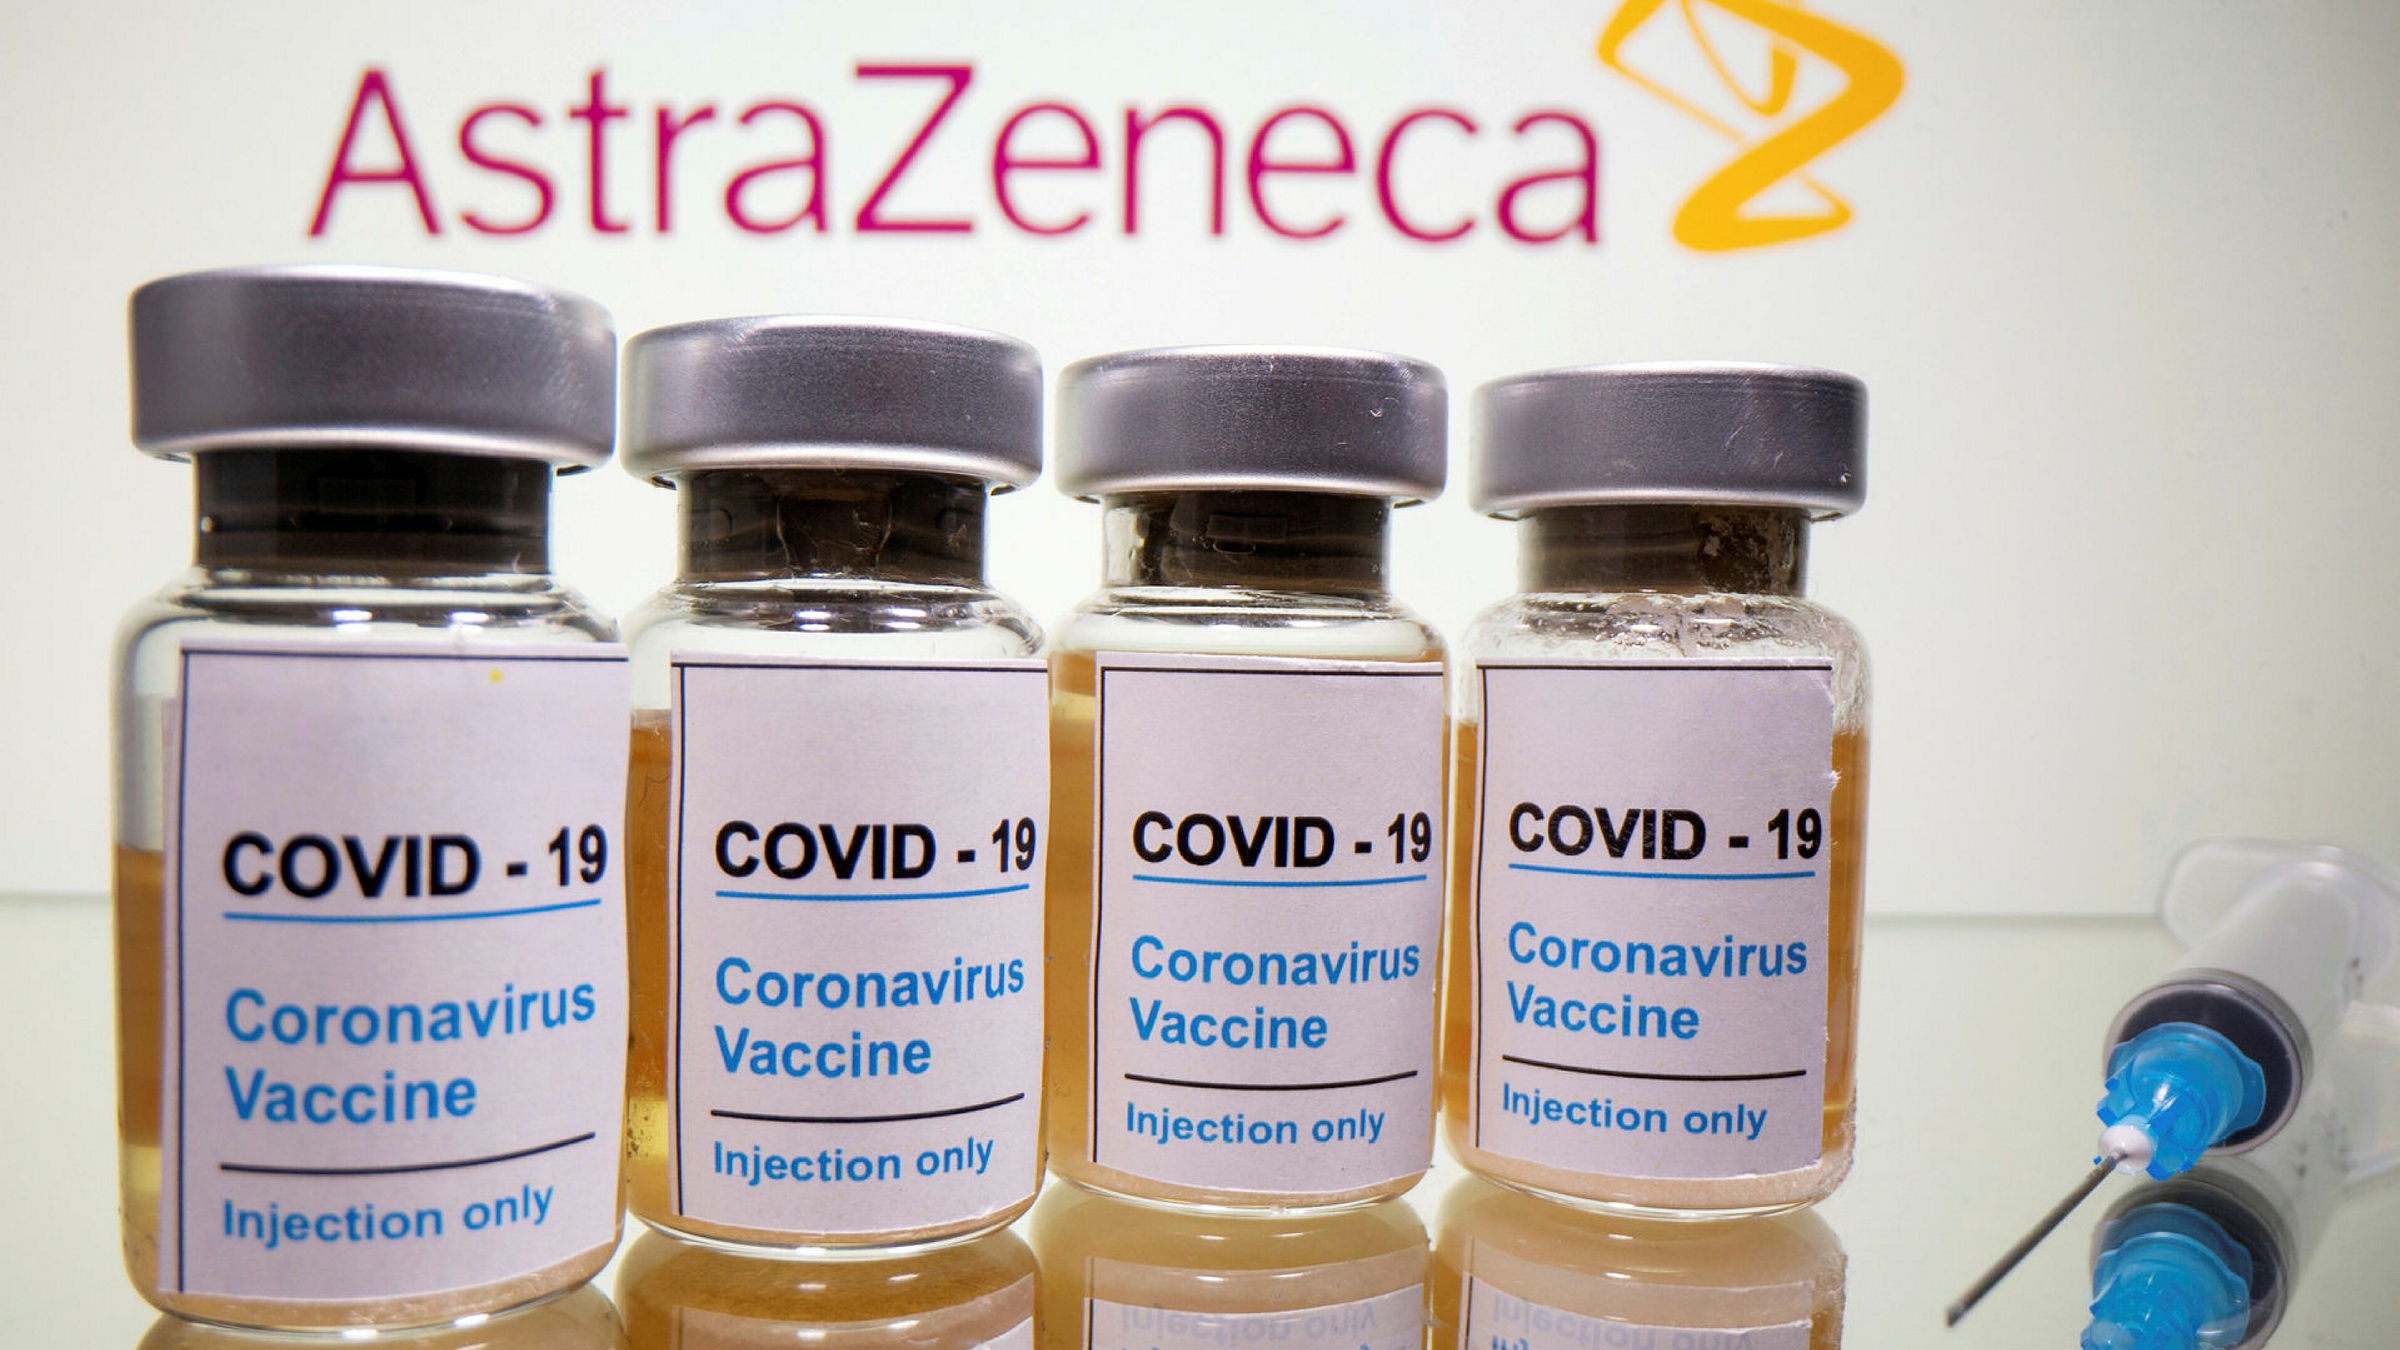 Morocco ready to roll out vaccine as soon as it receives doses